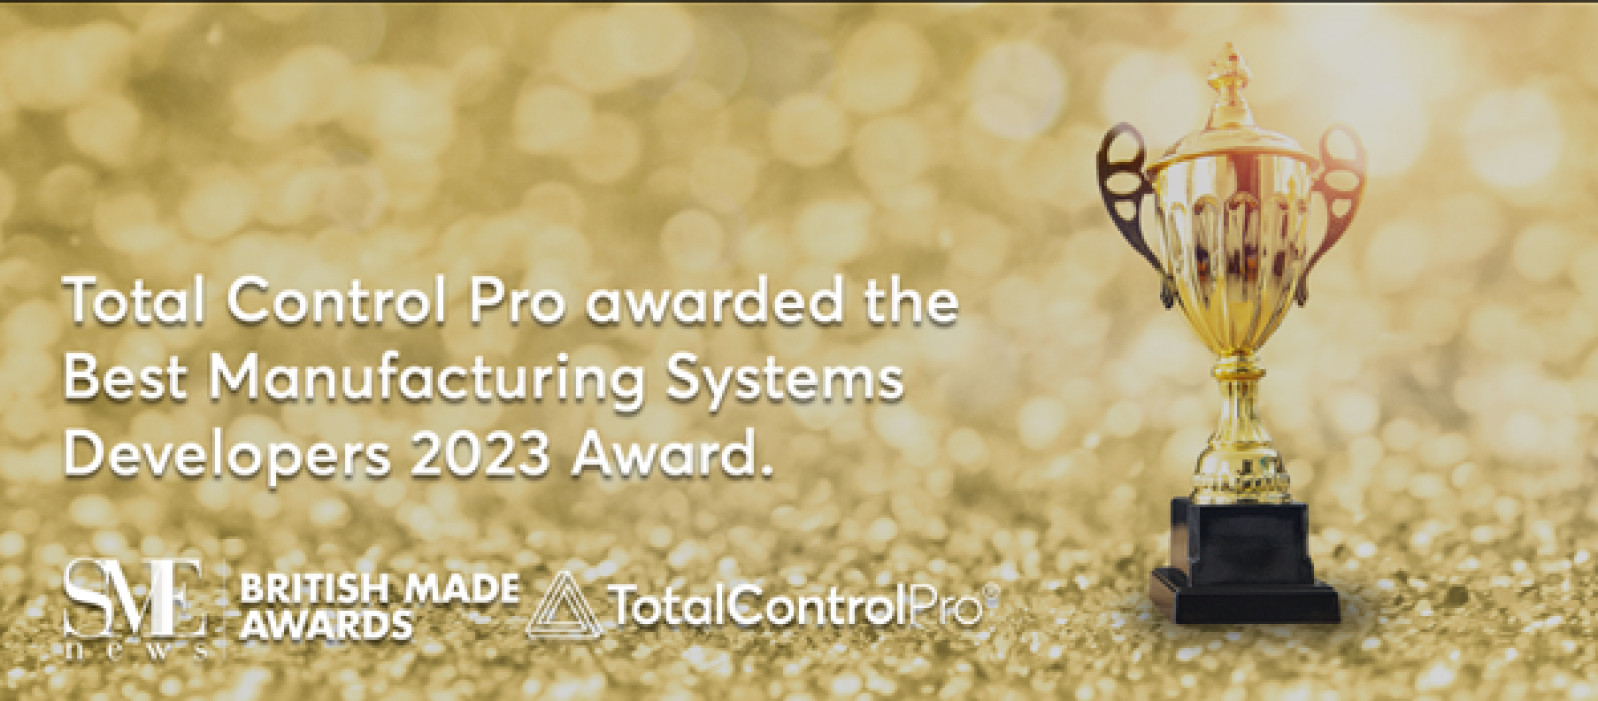 Total Control Pro has been awarded Best Manufactur...